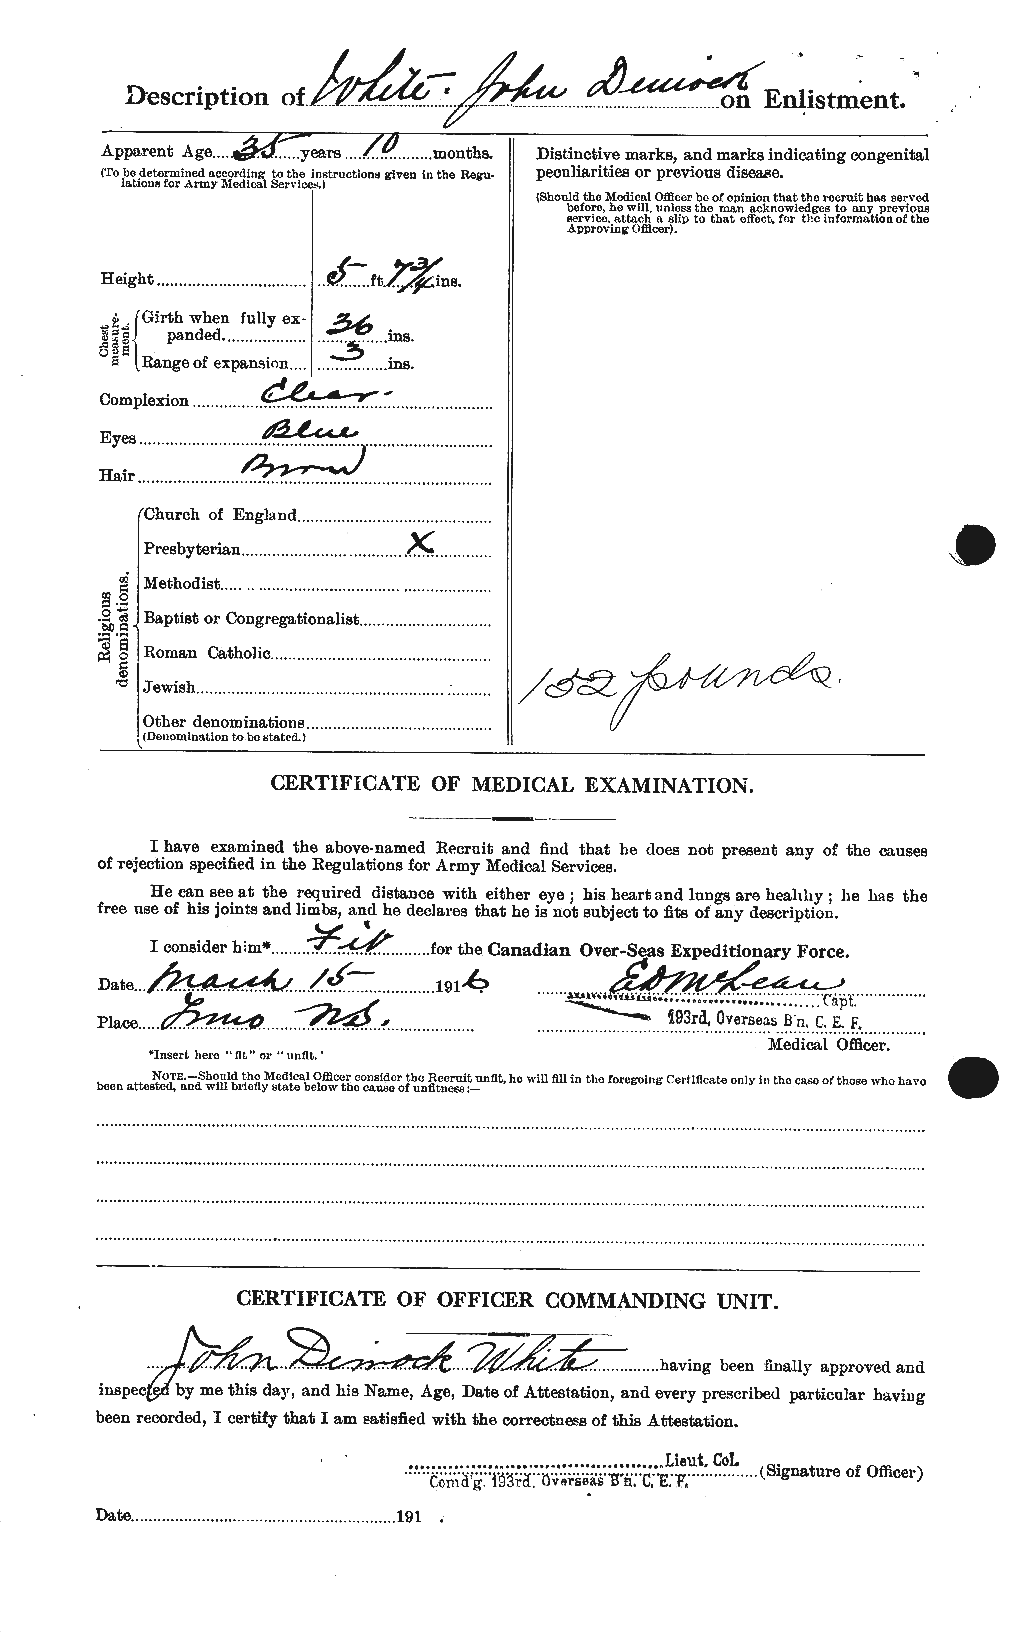 Personnel Records of the First World War - CEF 671551b